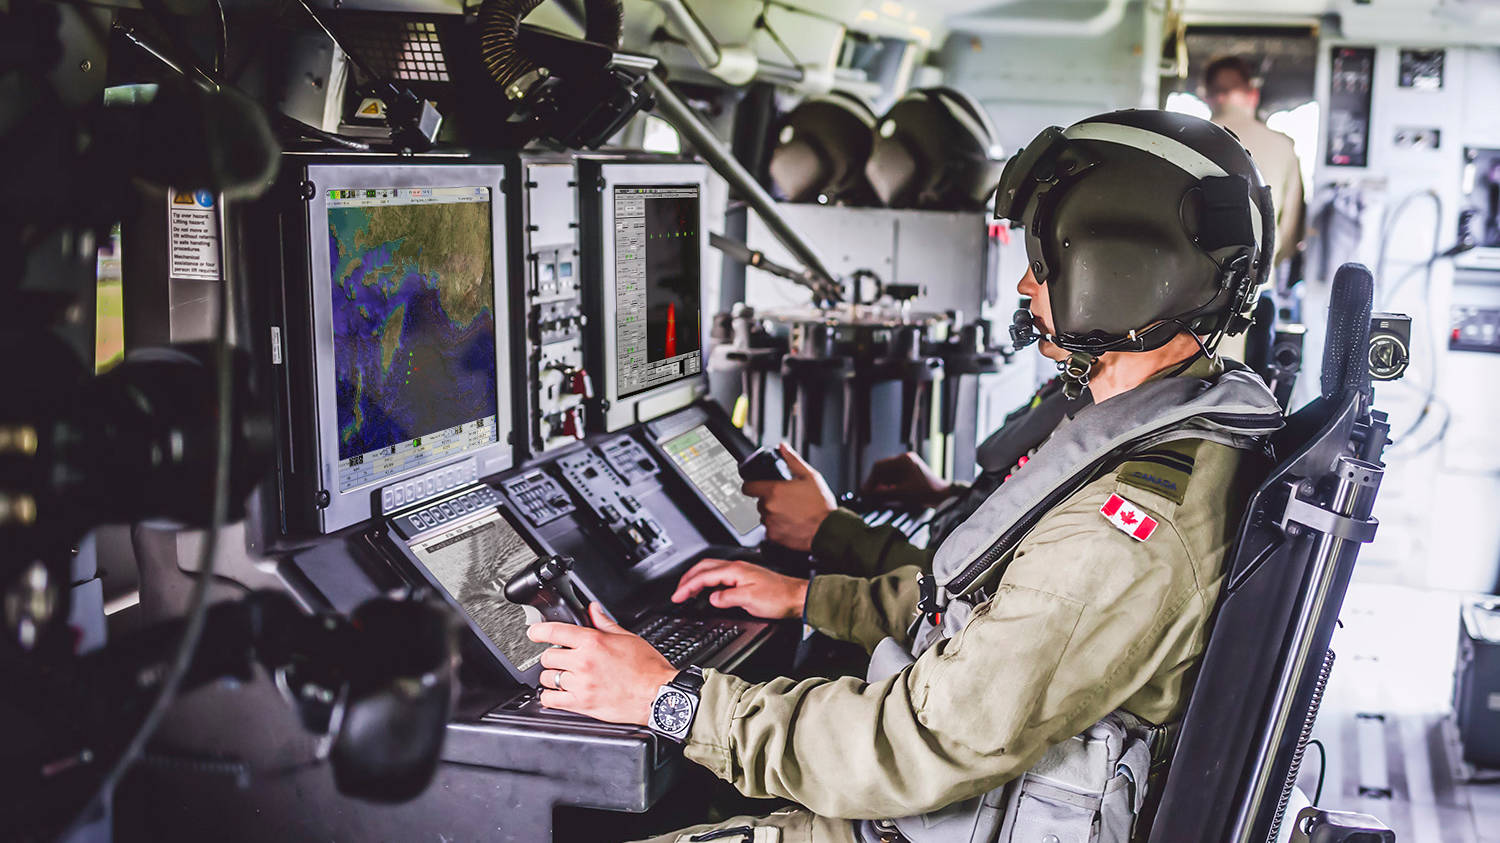 Member of the Canadian Armed Forces at console.